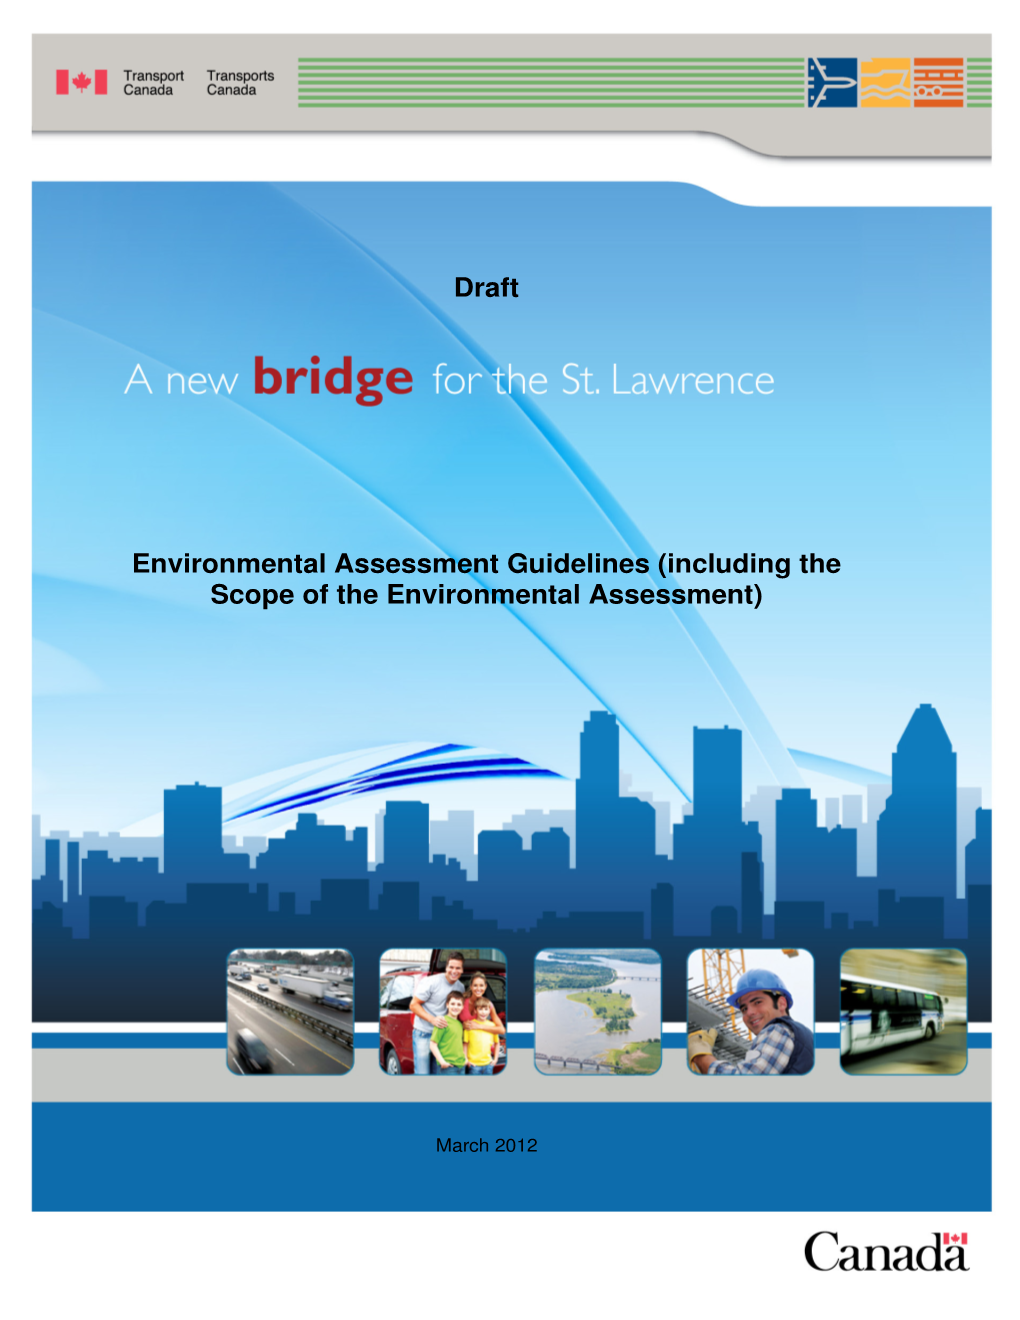 Draft Environmental Assessment Guidelines (Including the Scope Of